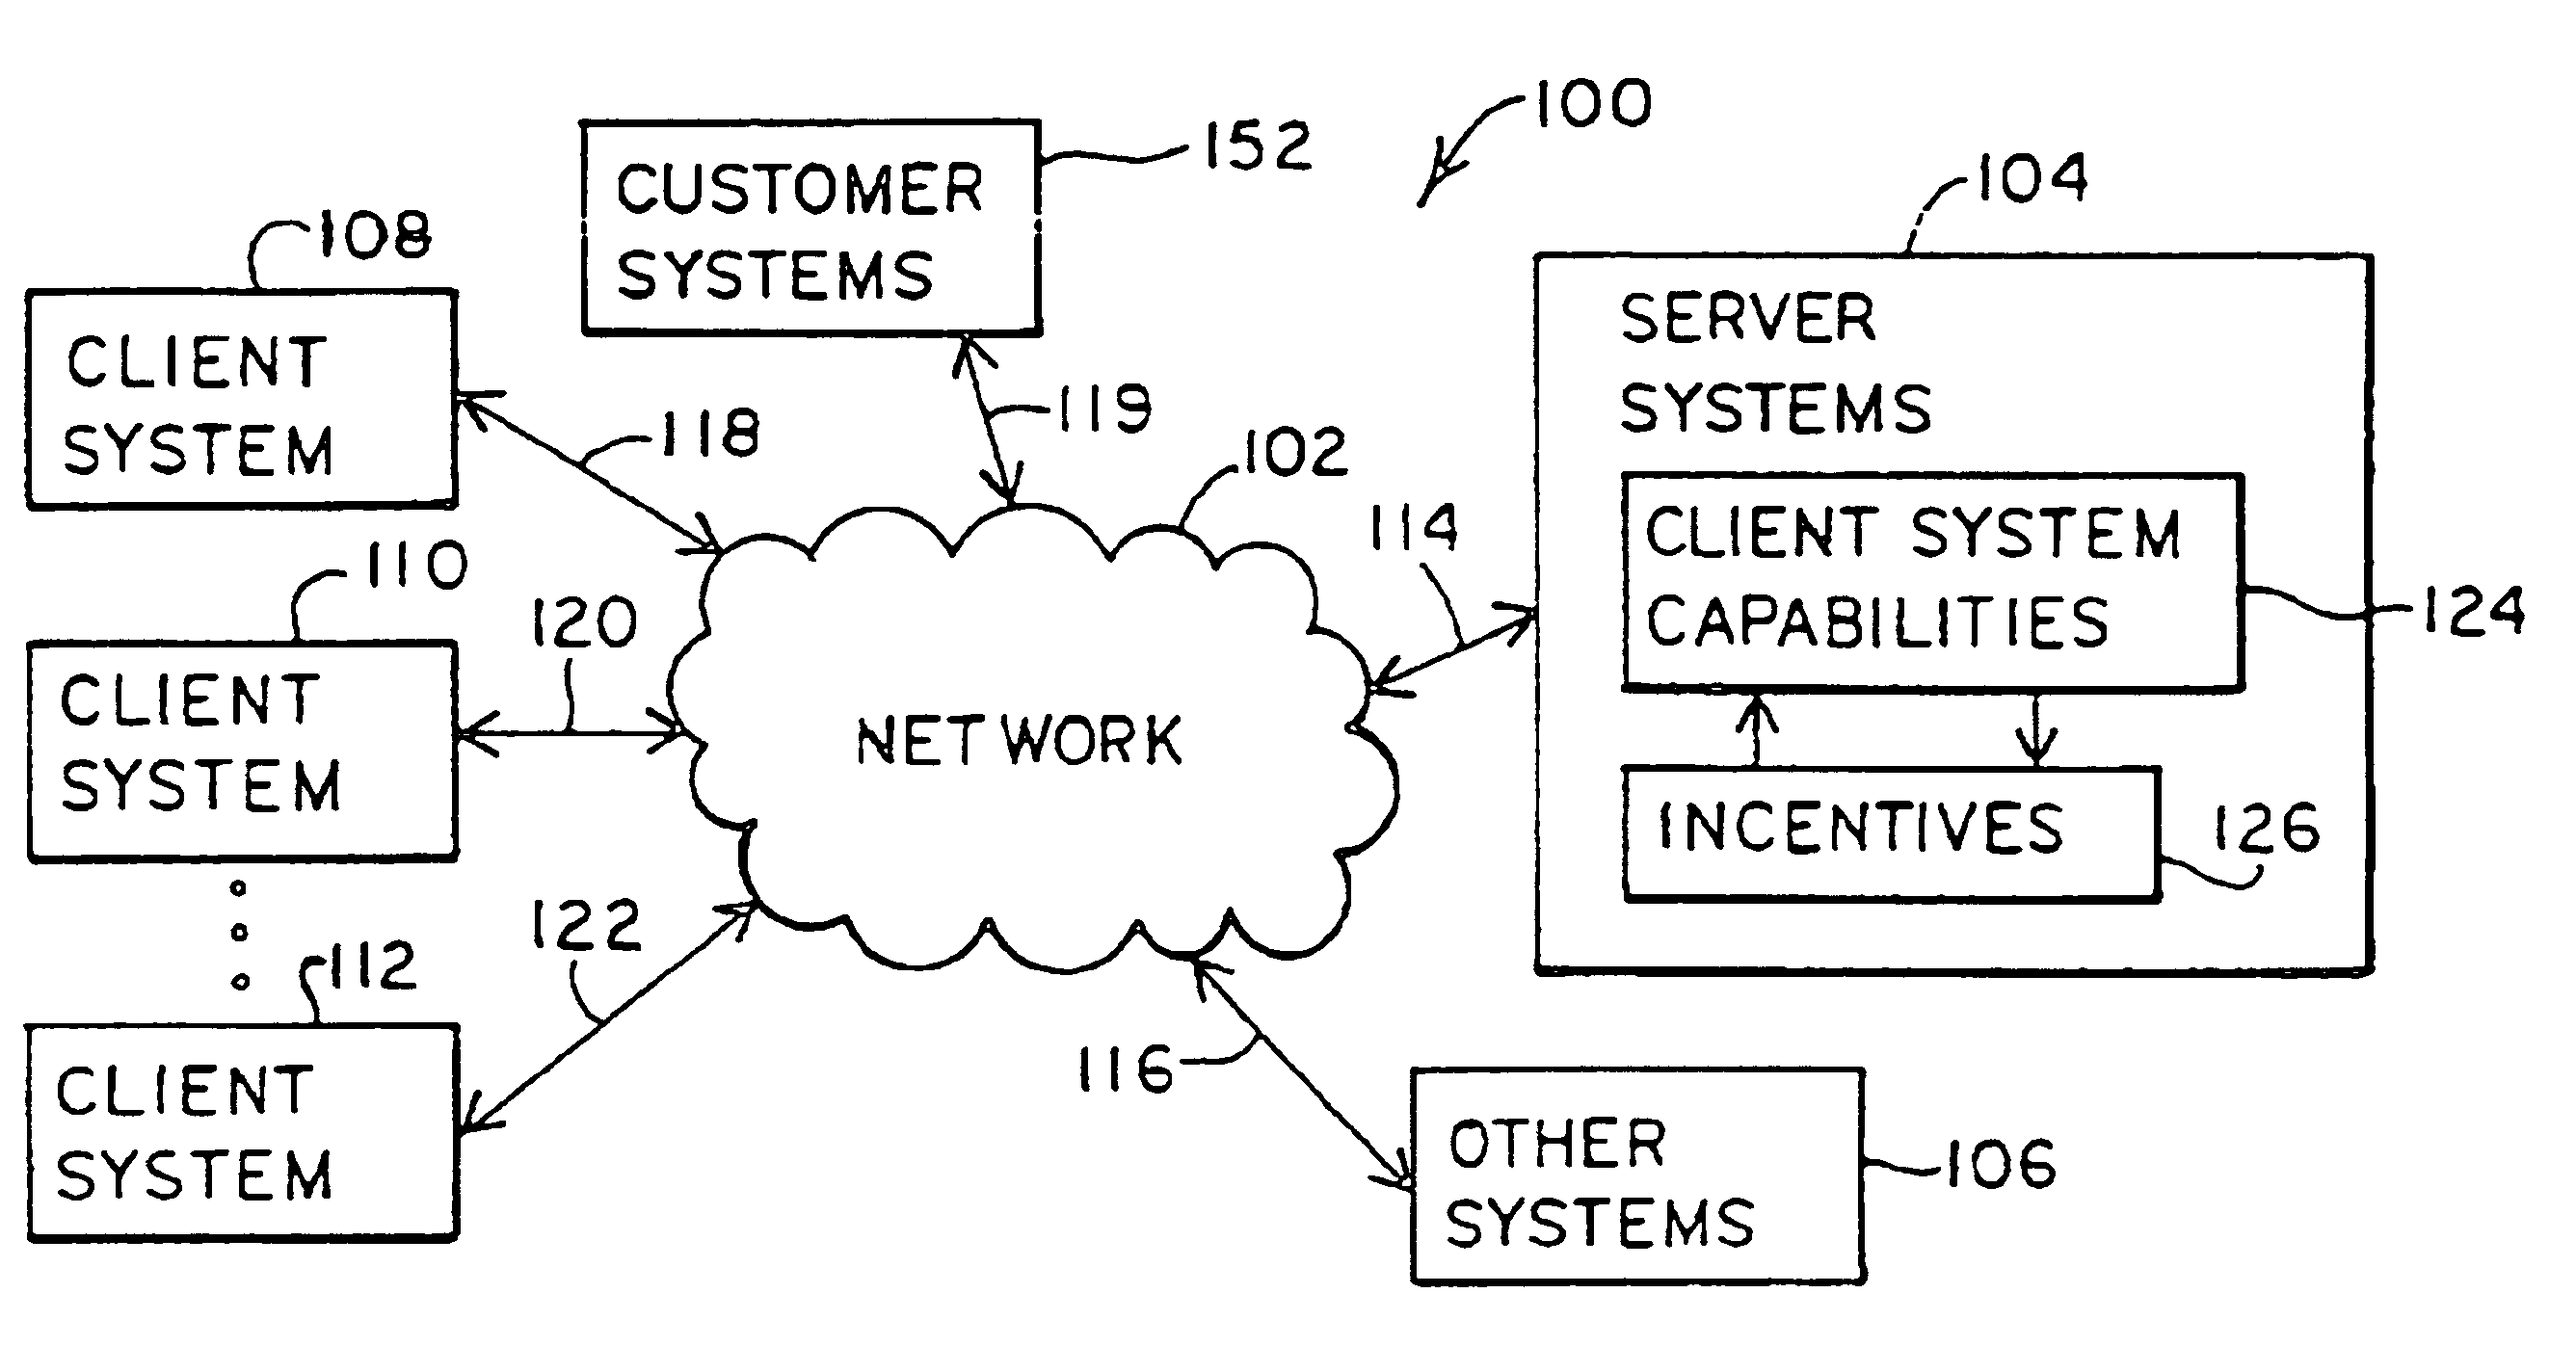 Dynamic coordination and control of network connected devices for large-scale network site testing and associated architectures